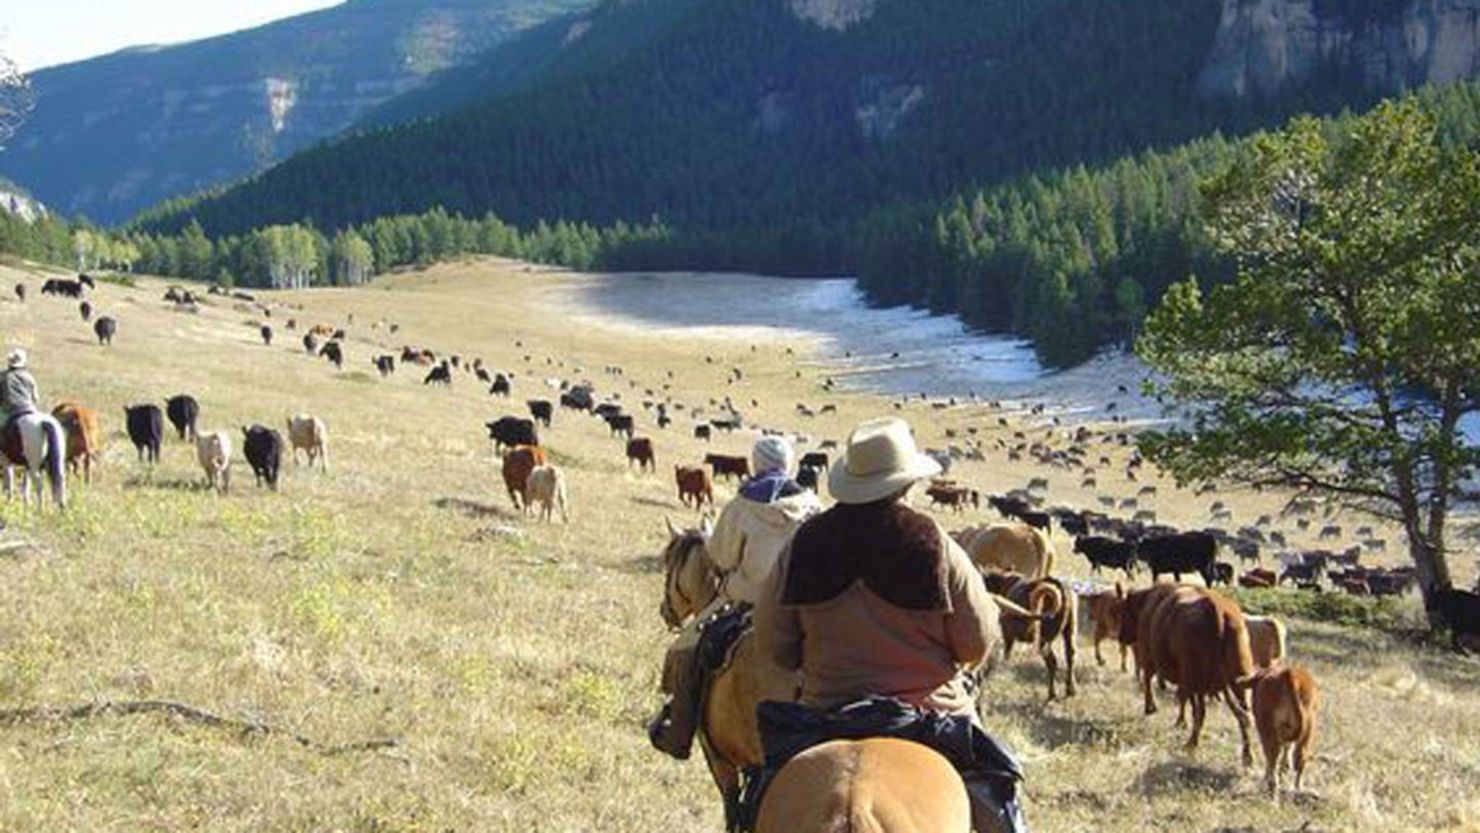 Wyoming's Doublerafter Cattle Drives offers "real deal" Western experiences.